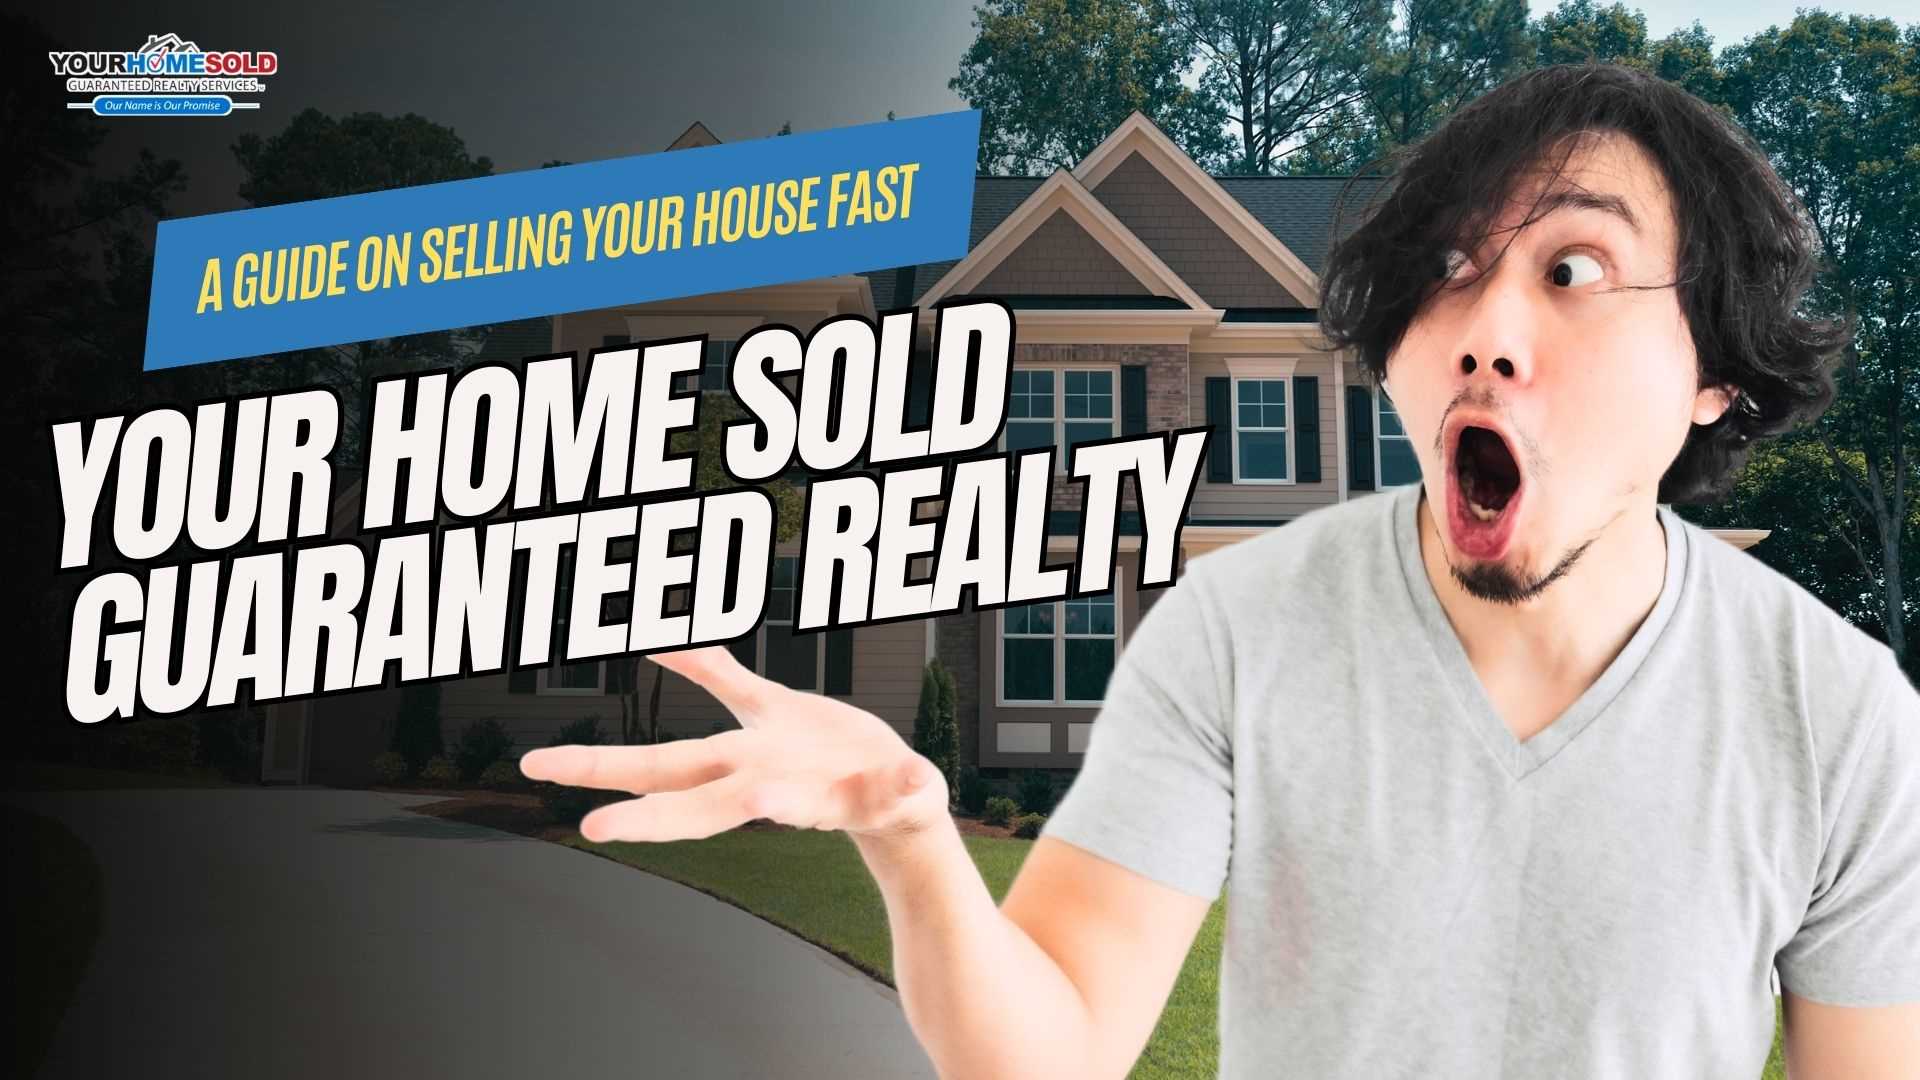 A GUIDE ON SELLING YOUR HOUSE FAST